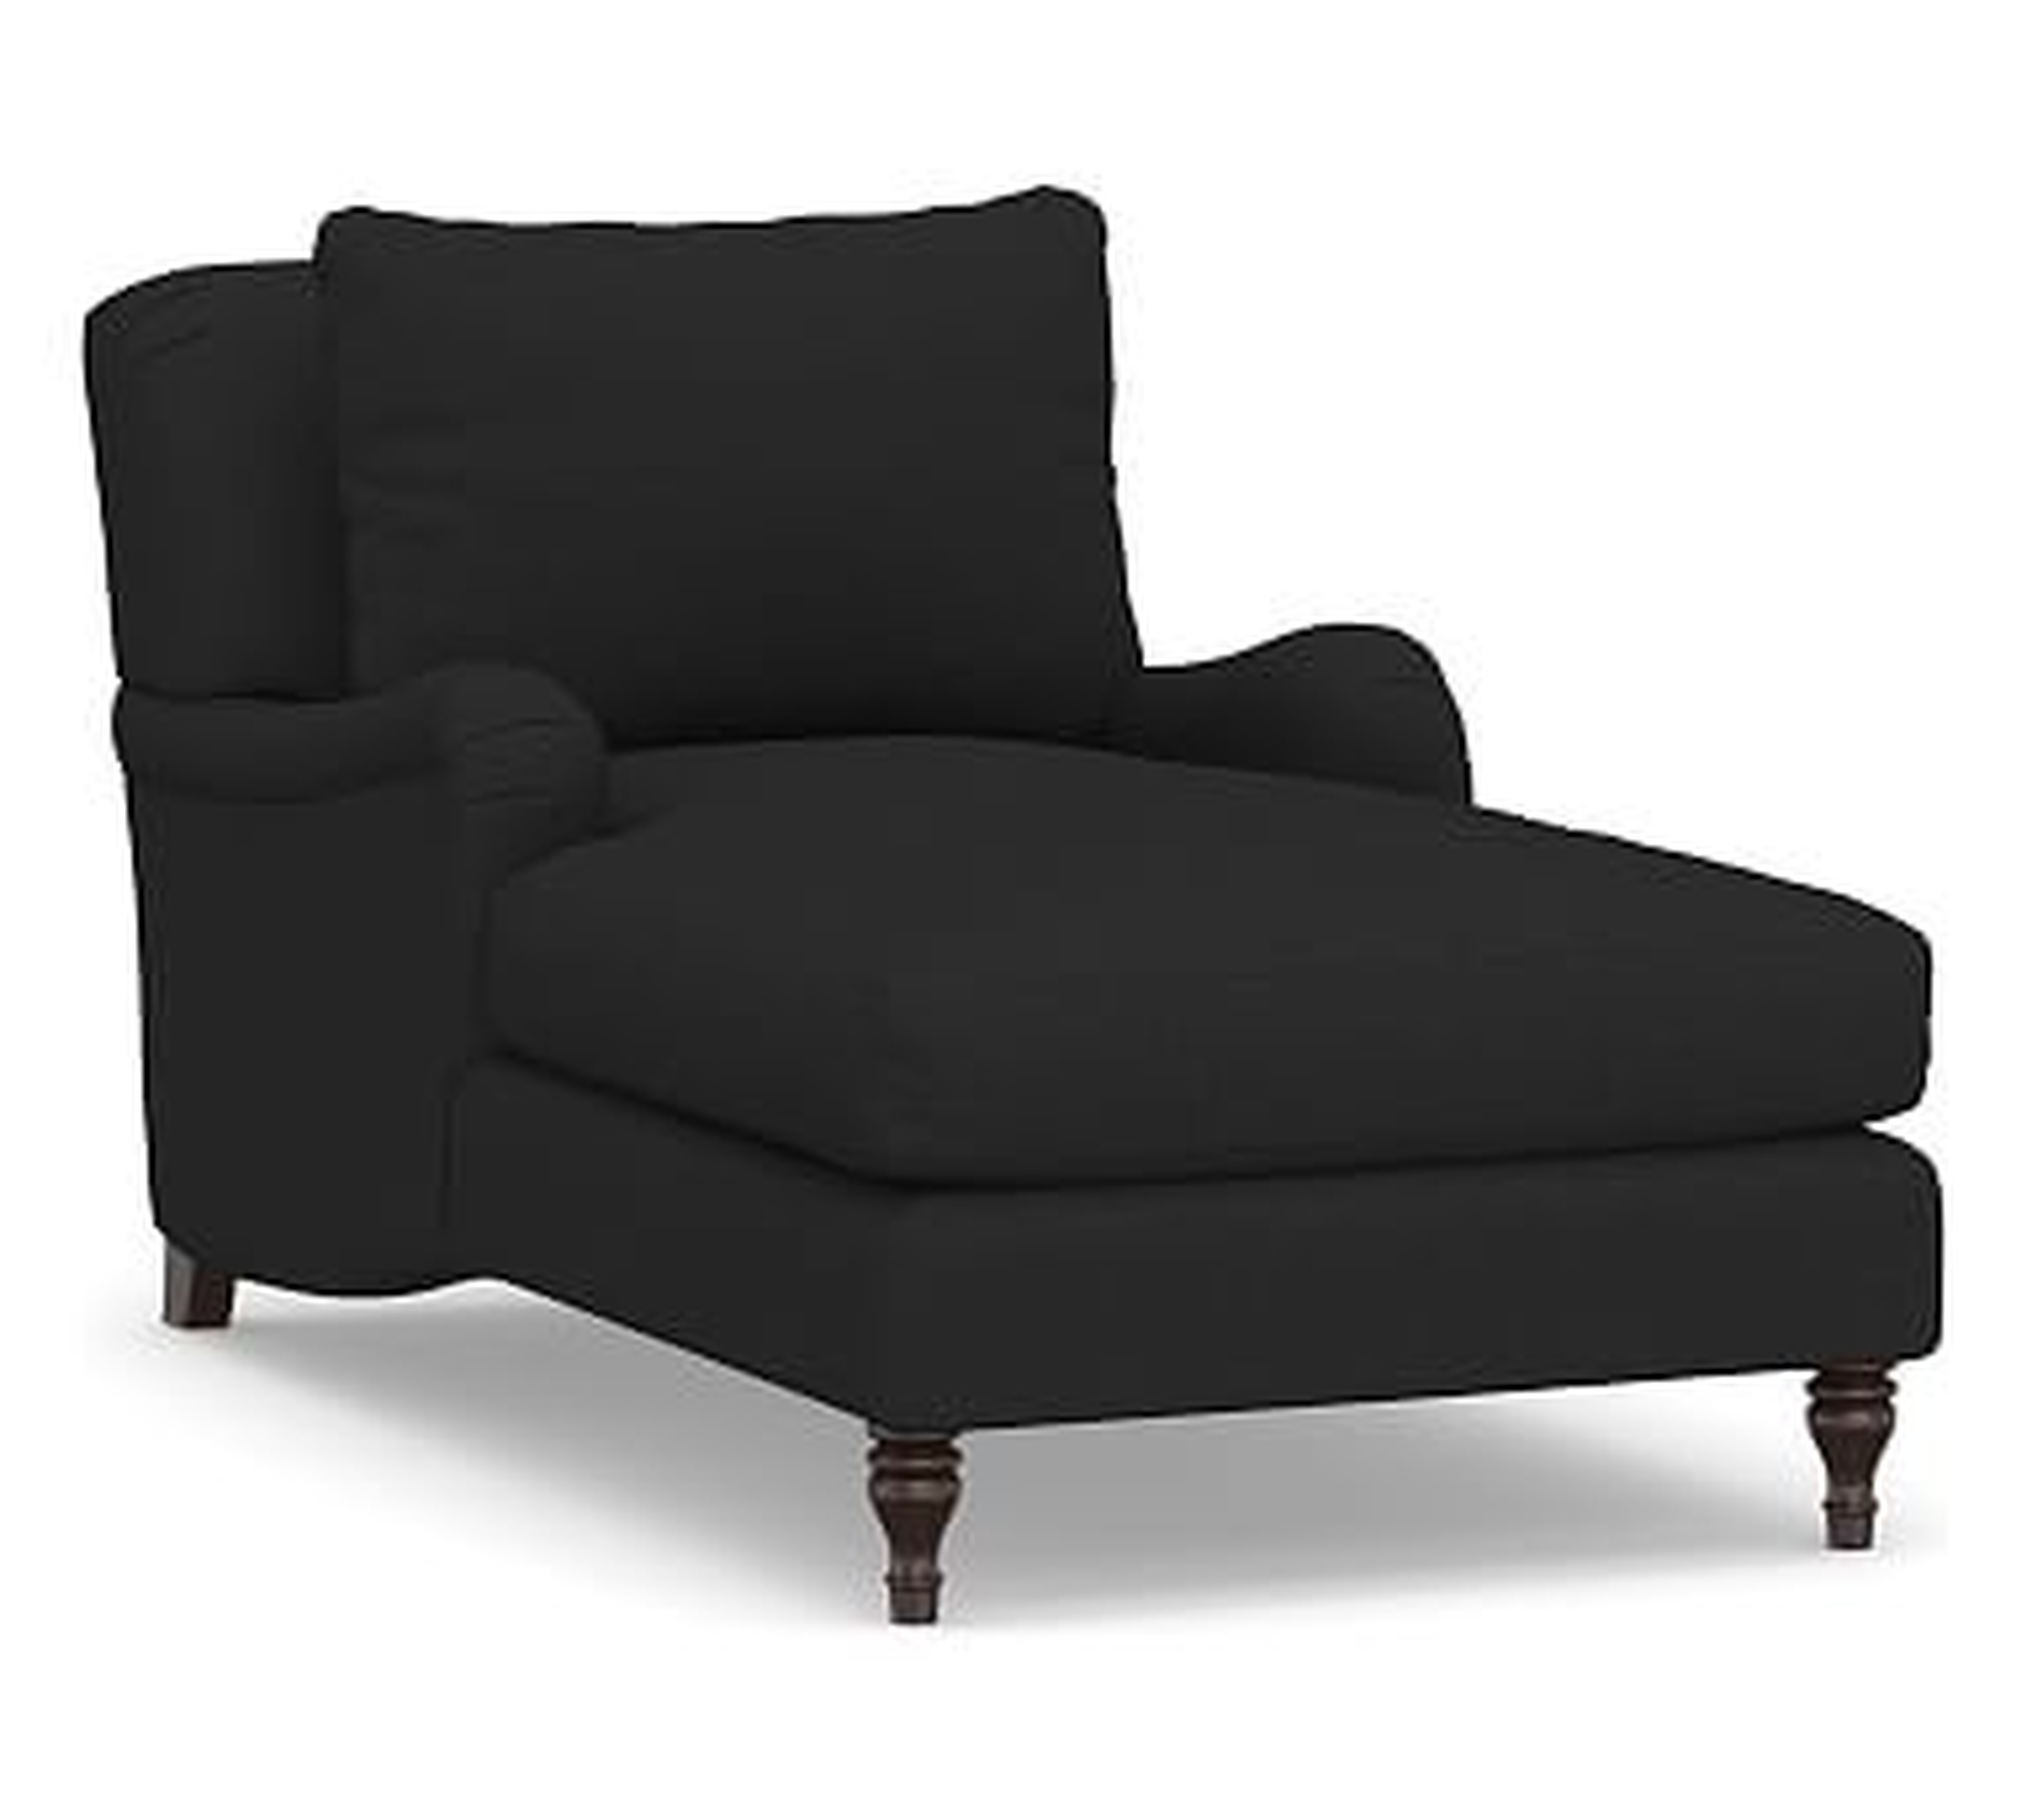 Carlisle Upholstered Chaise, Polyester Wrapped Cushions, Textured Basketweave Black - Pottery Barn